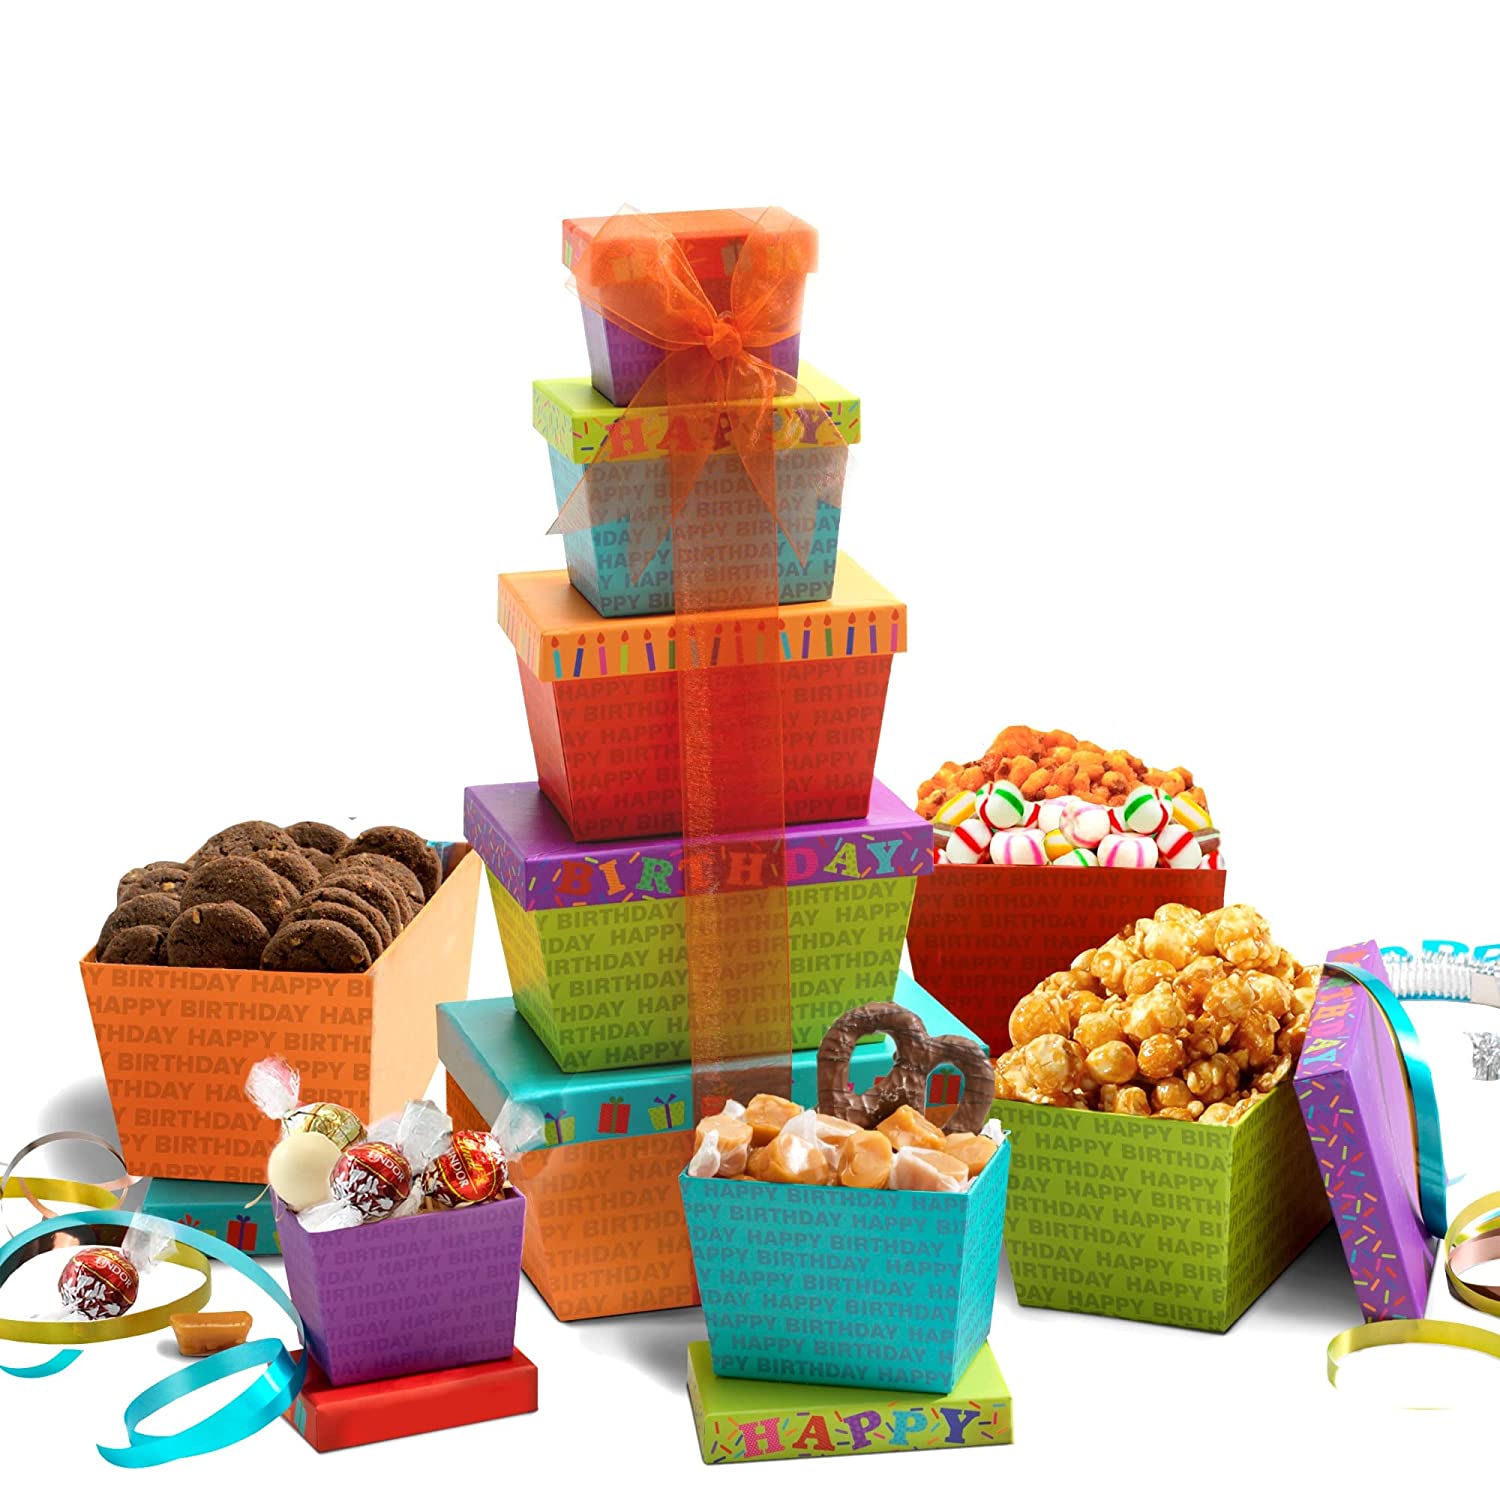 Broadway Basketeers Birthday Gift Basket With Snacks, Candy, & Cookies,  Gourmet Food Gifts, Kosher, For Men, Women, Kids & Adults